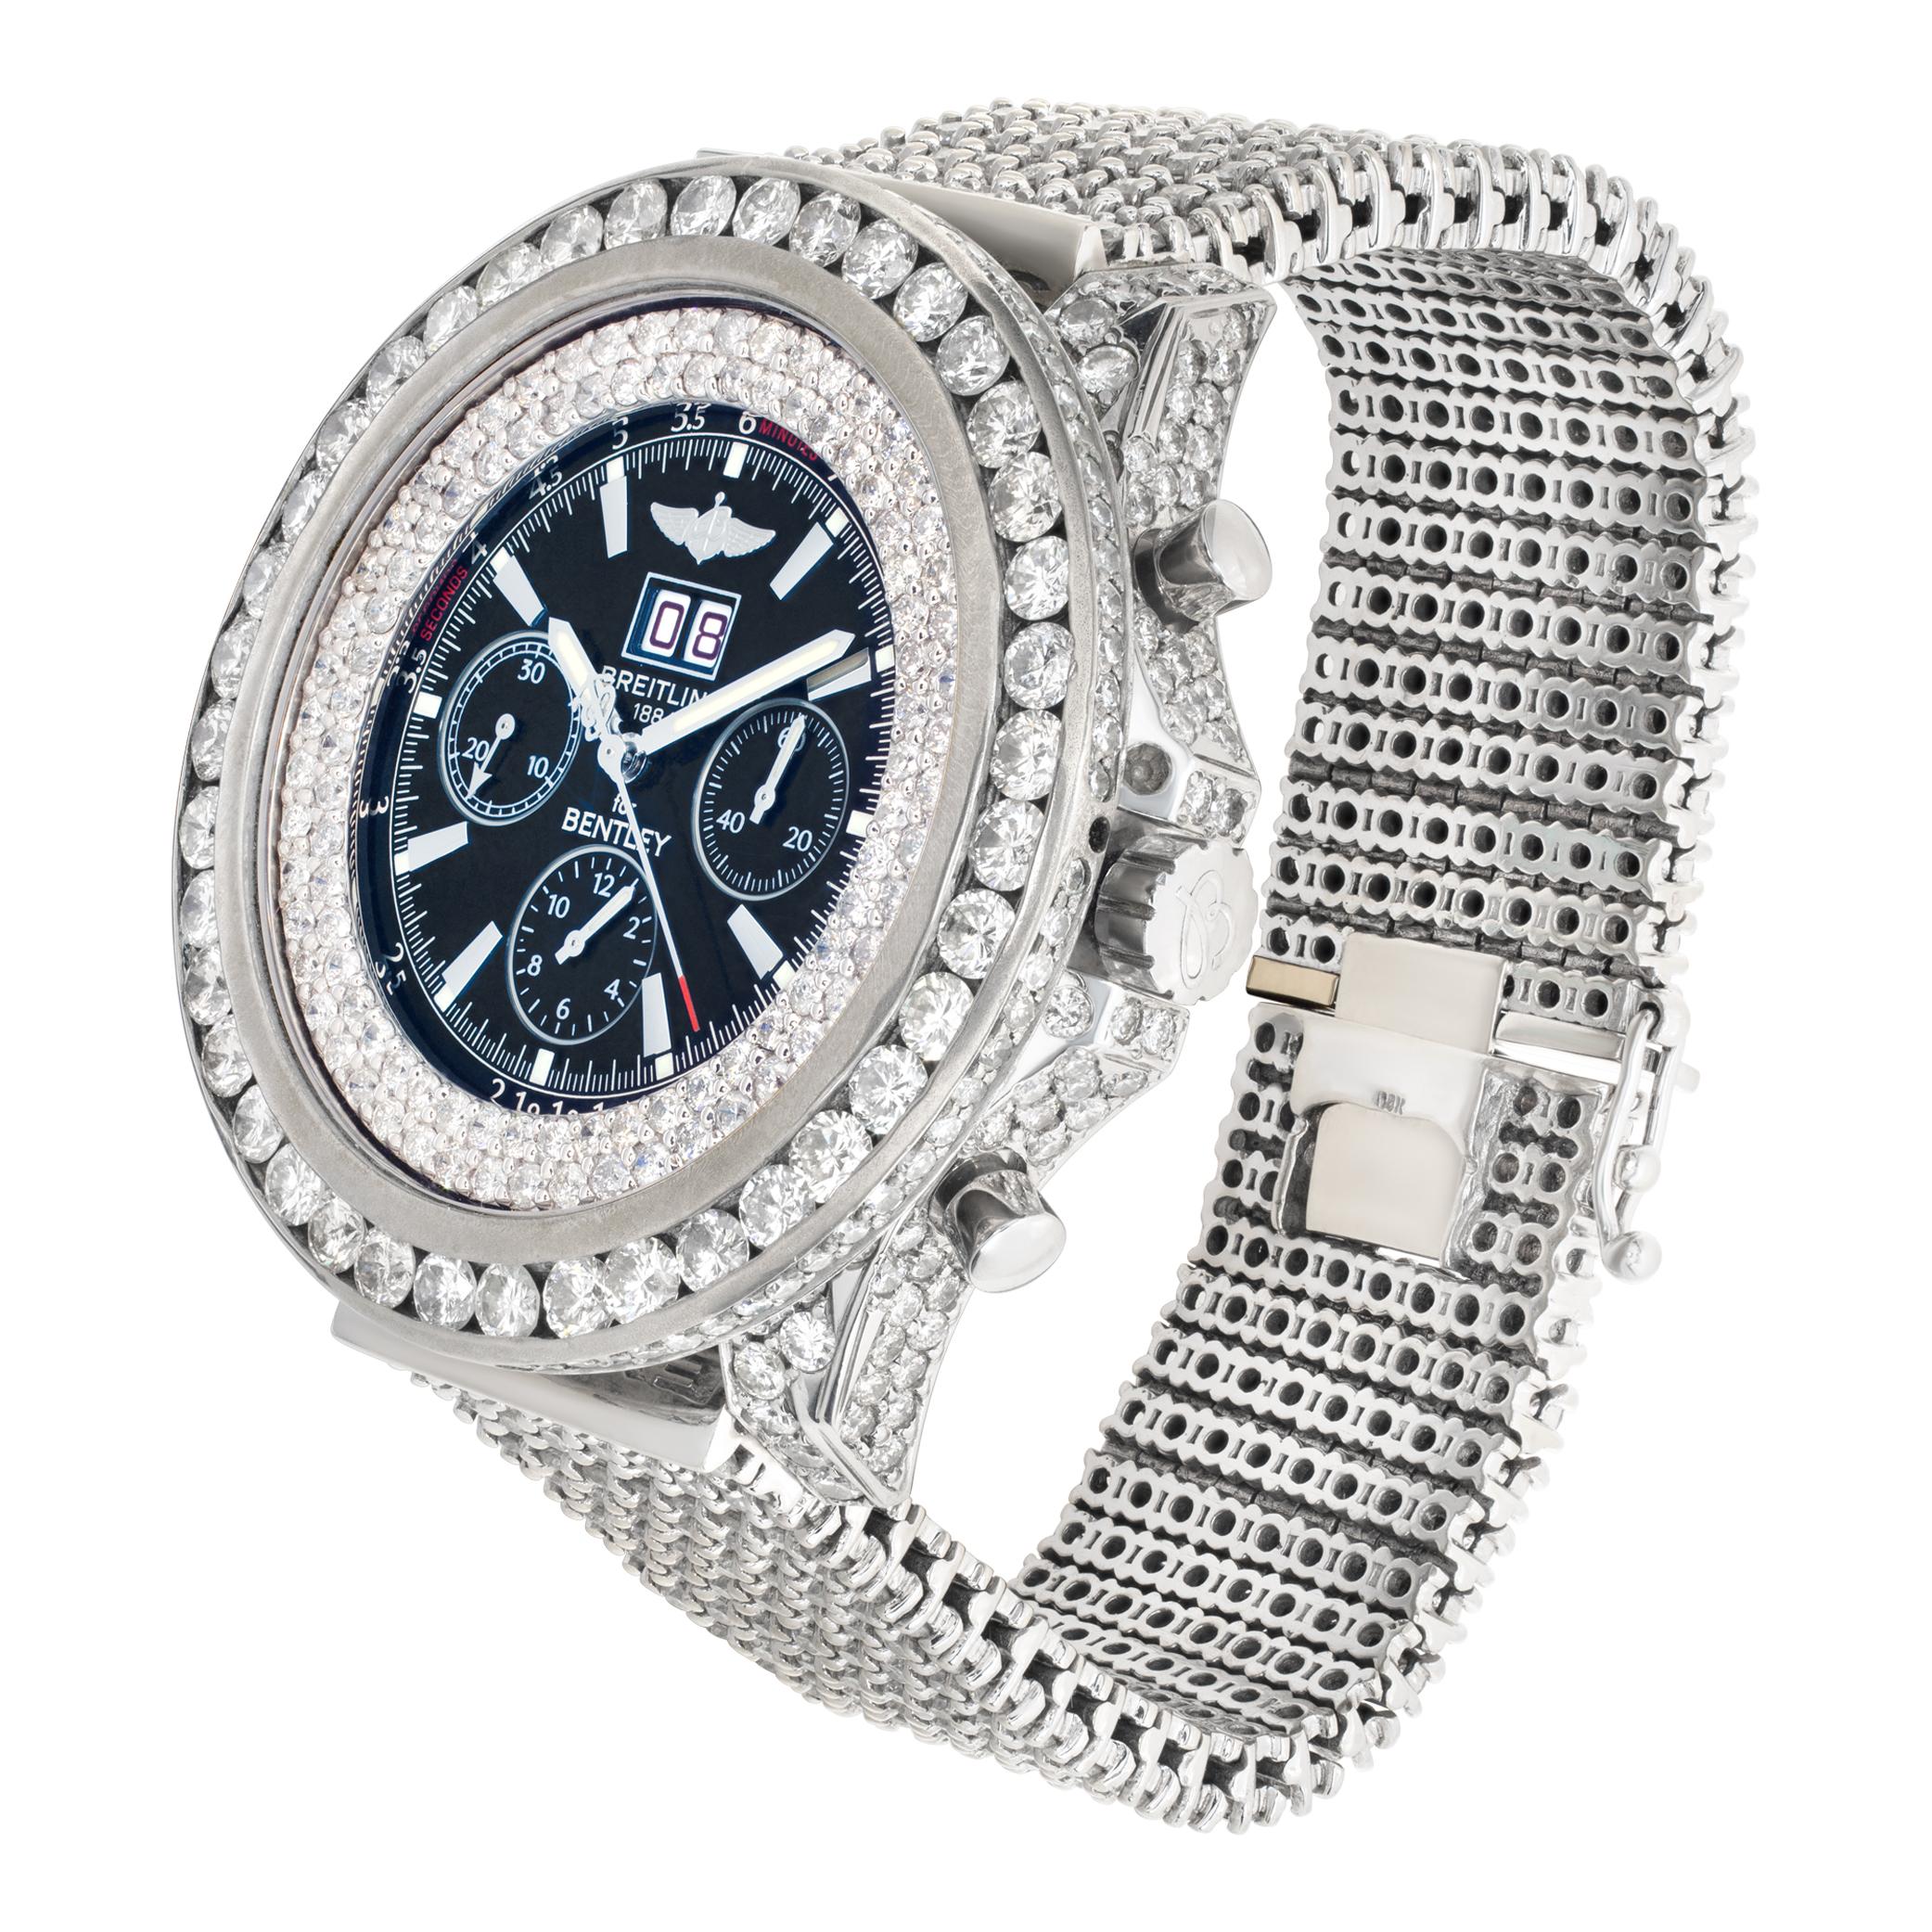 Breitling Bentley in stainless steel with custom diamond dial, case and bezel with a custom 14k white gold full diamond bracelet. Auto w/ subseconds, date and chronograph. 52 mm case size. Will fit up to an 8 inch wrist. Over 26 carats in diamonds!